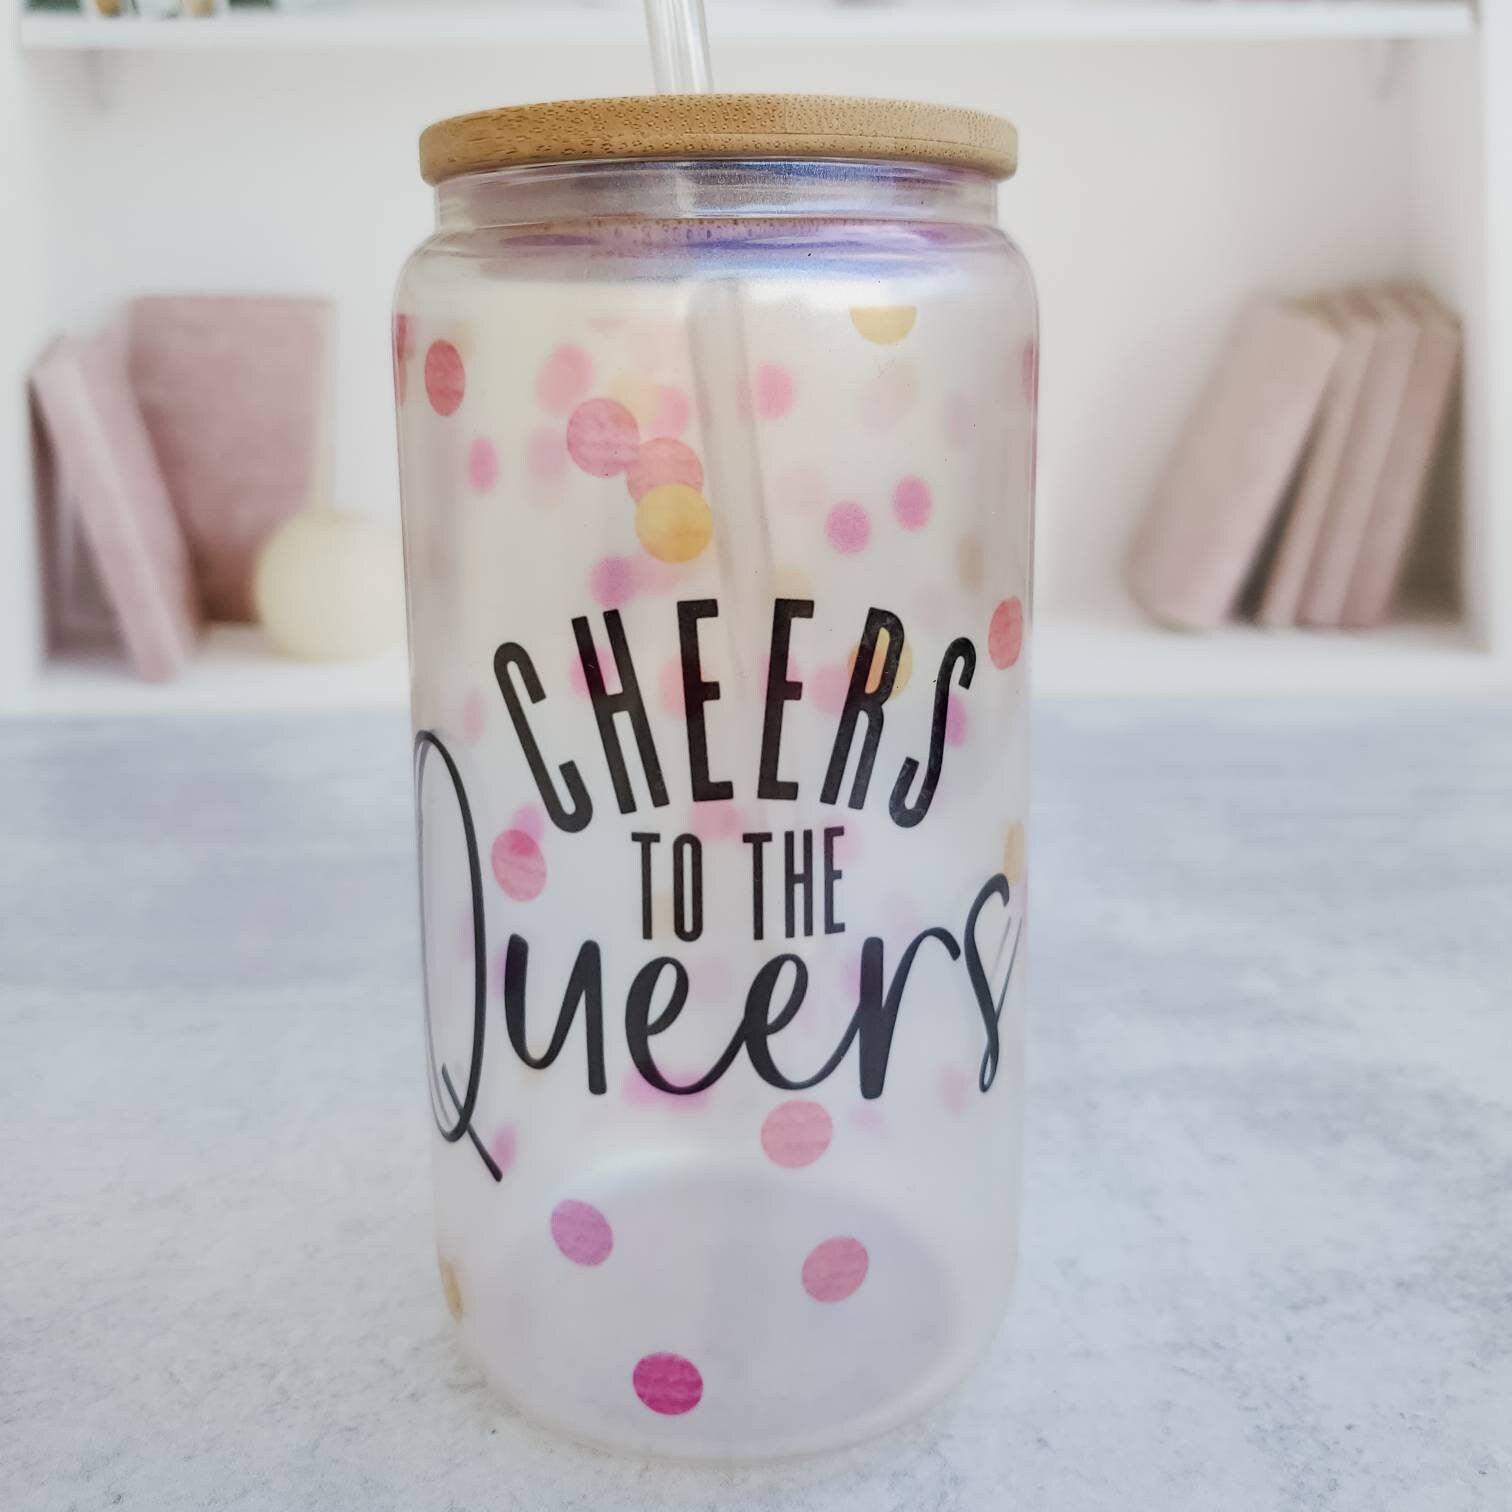 Cheers to the Queers Iridscent Glass Tumbler - Rainbow PRIDE Parade Party Cup - LQBTQIA+ Travel Cup - Glass Can Cup for Queer Non Binary